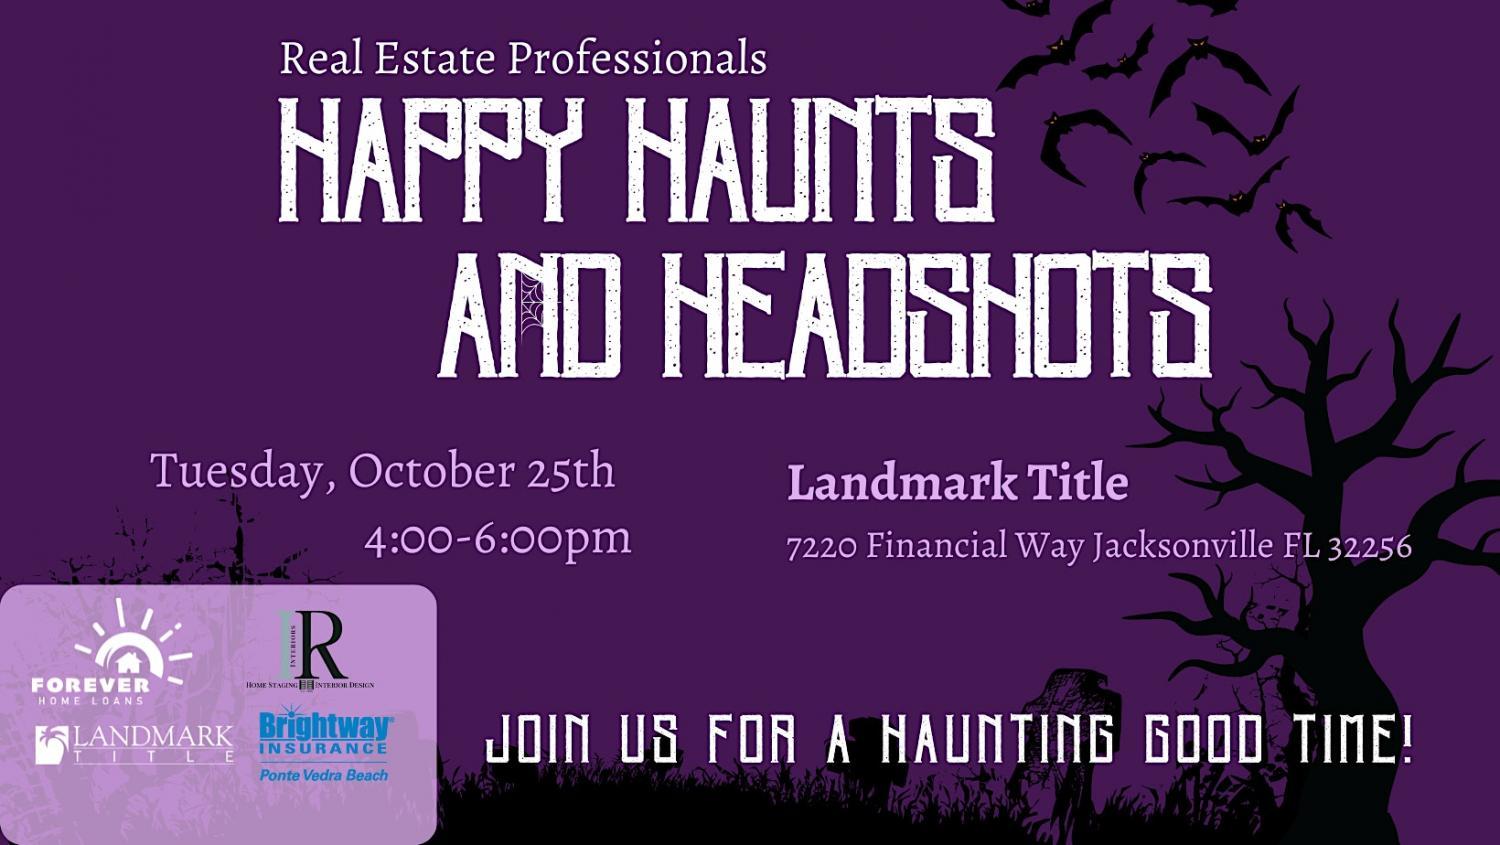 Happy Haunts and Headshots
Tue Oct 25, 7:00 PM - Tue Oct 25, 7:00 PM
in 5 days